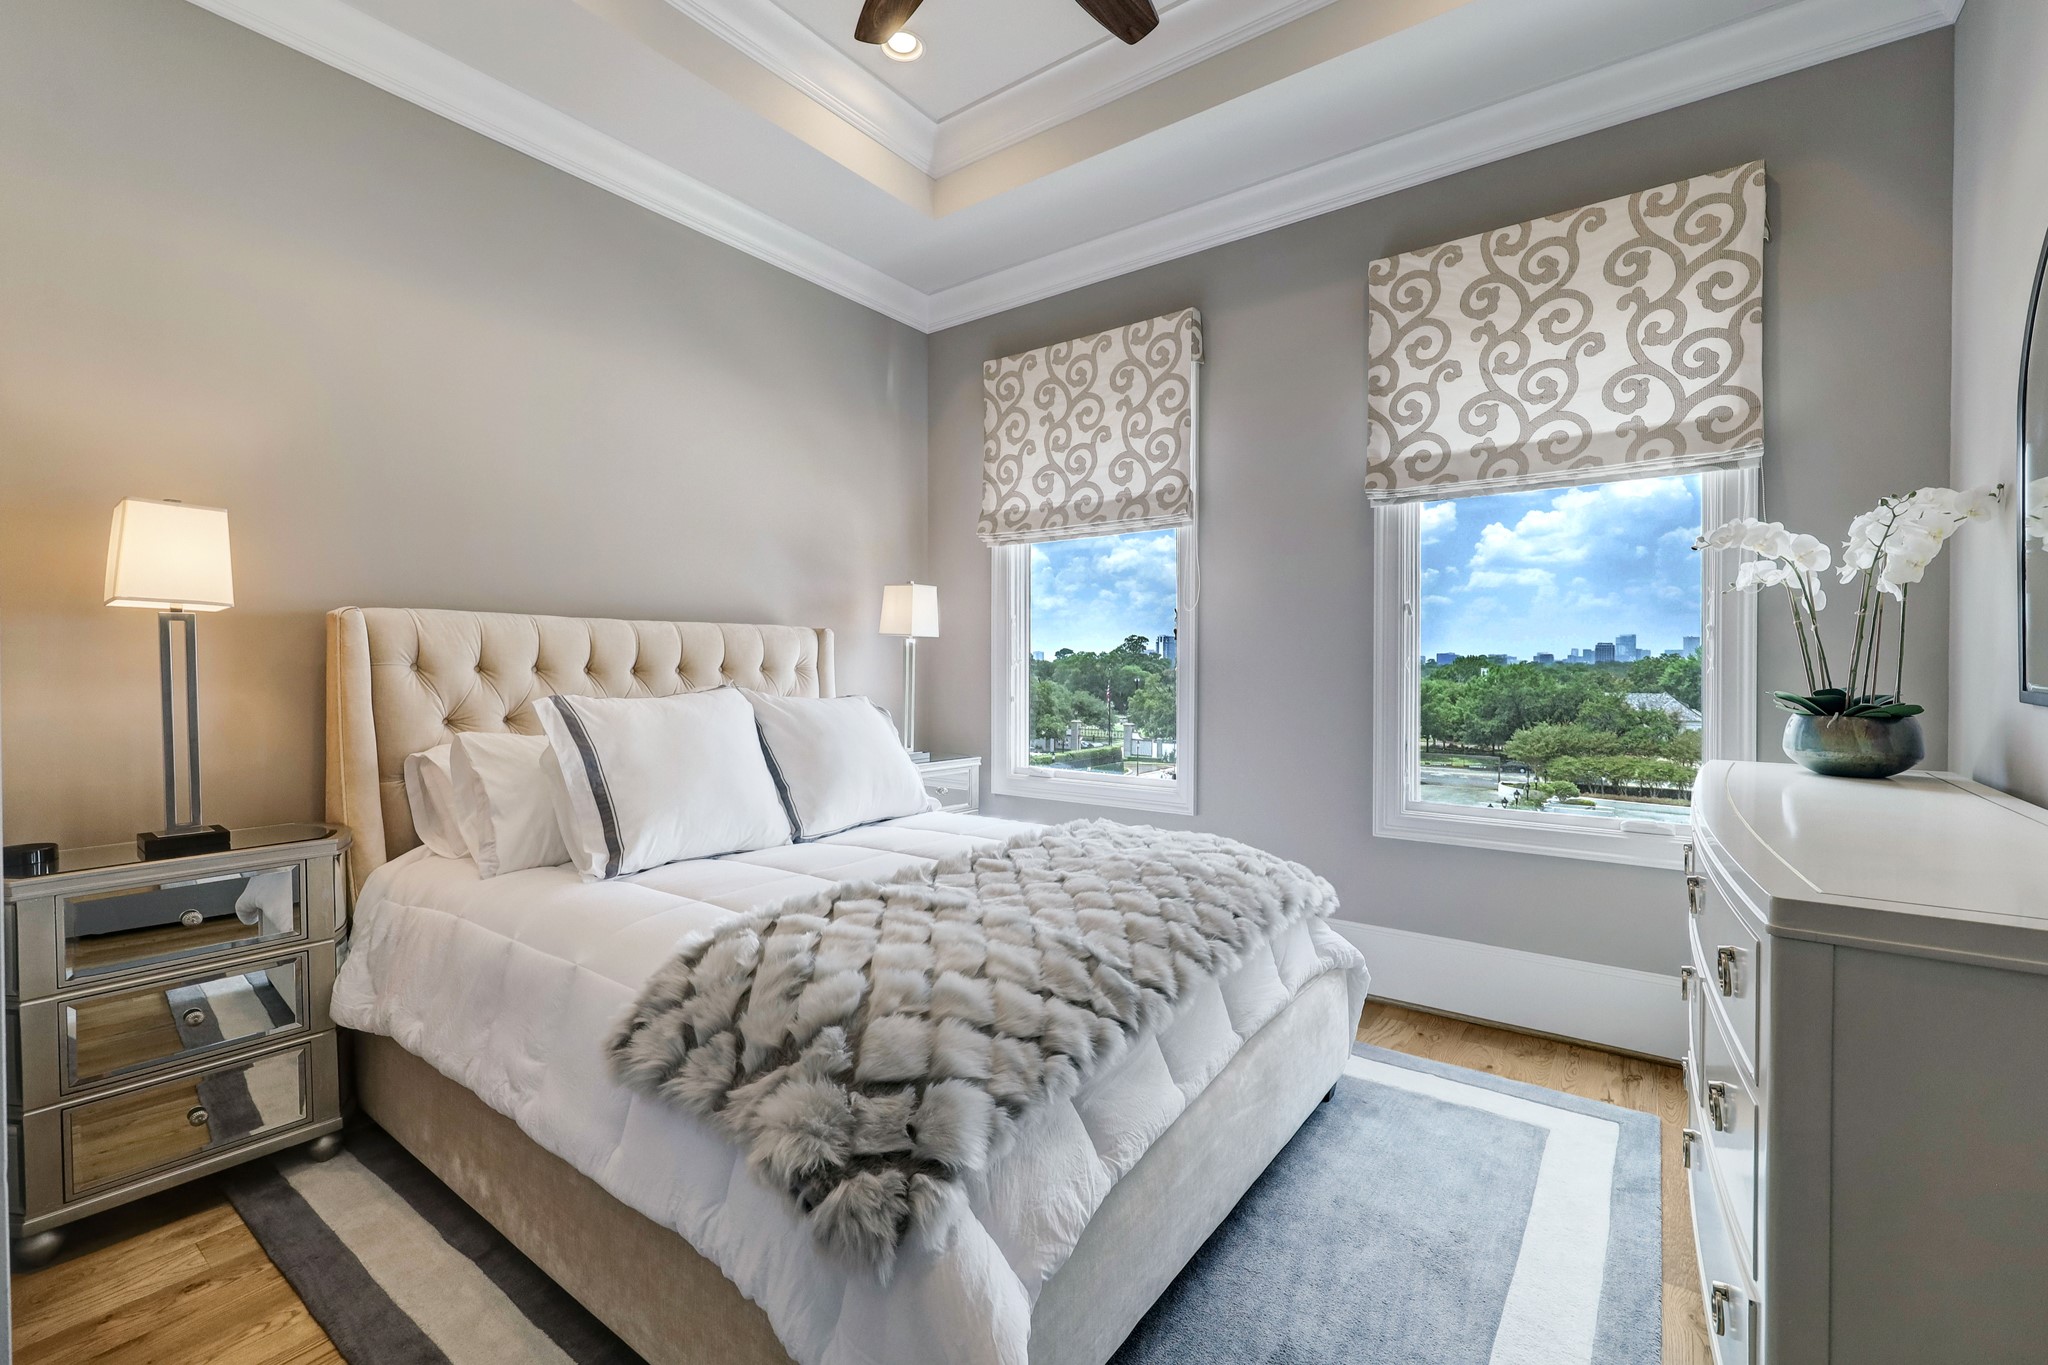 This secondary bedroom on the fourth floor features crown molding, spacious closet, large windows, and access to the game room.